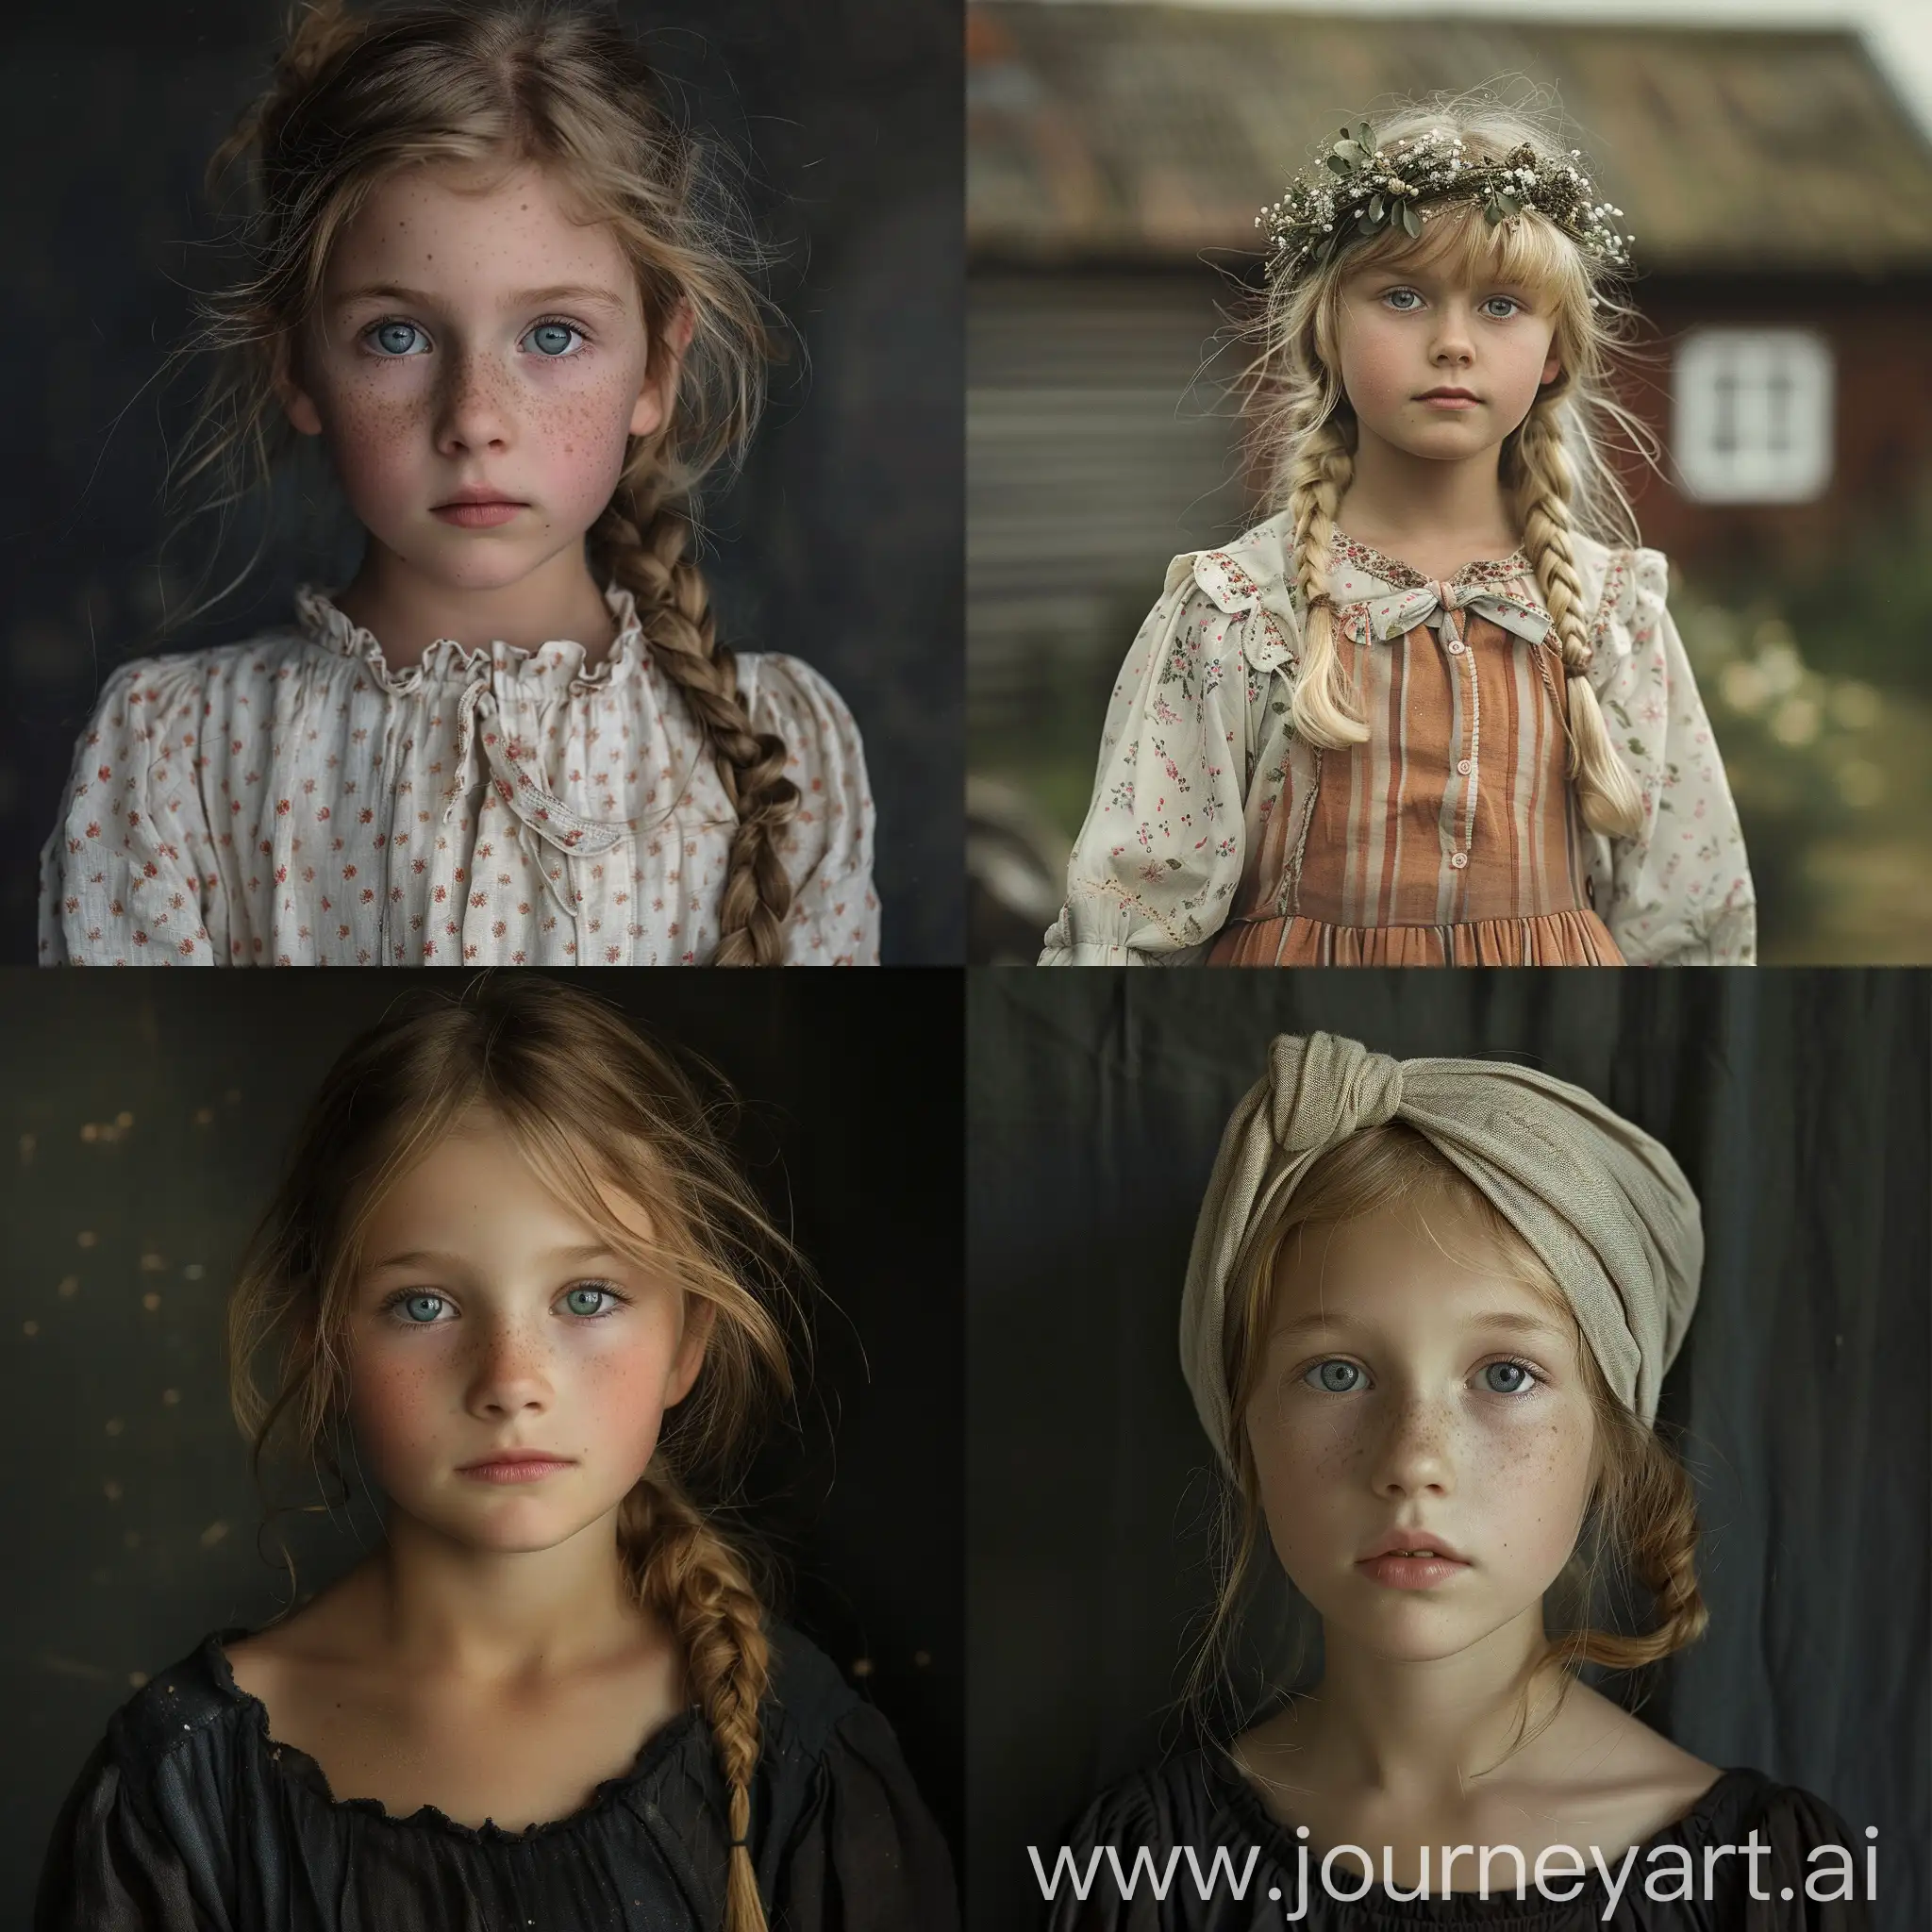 A young danish girl